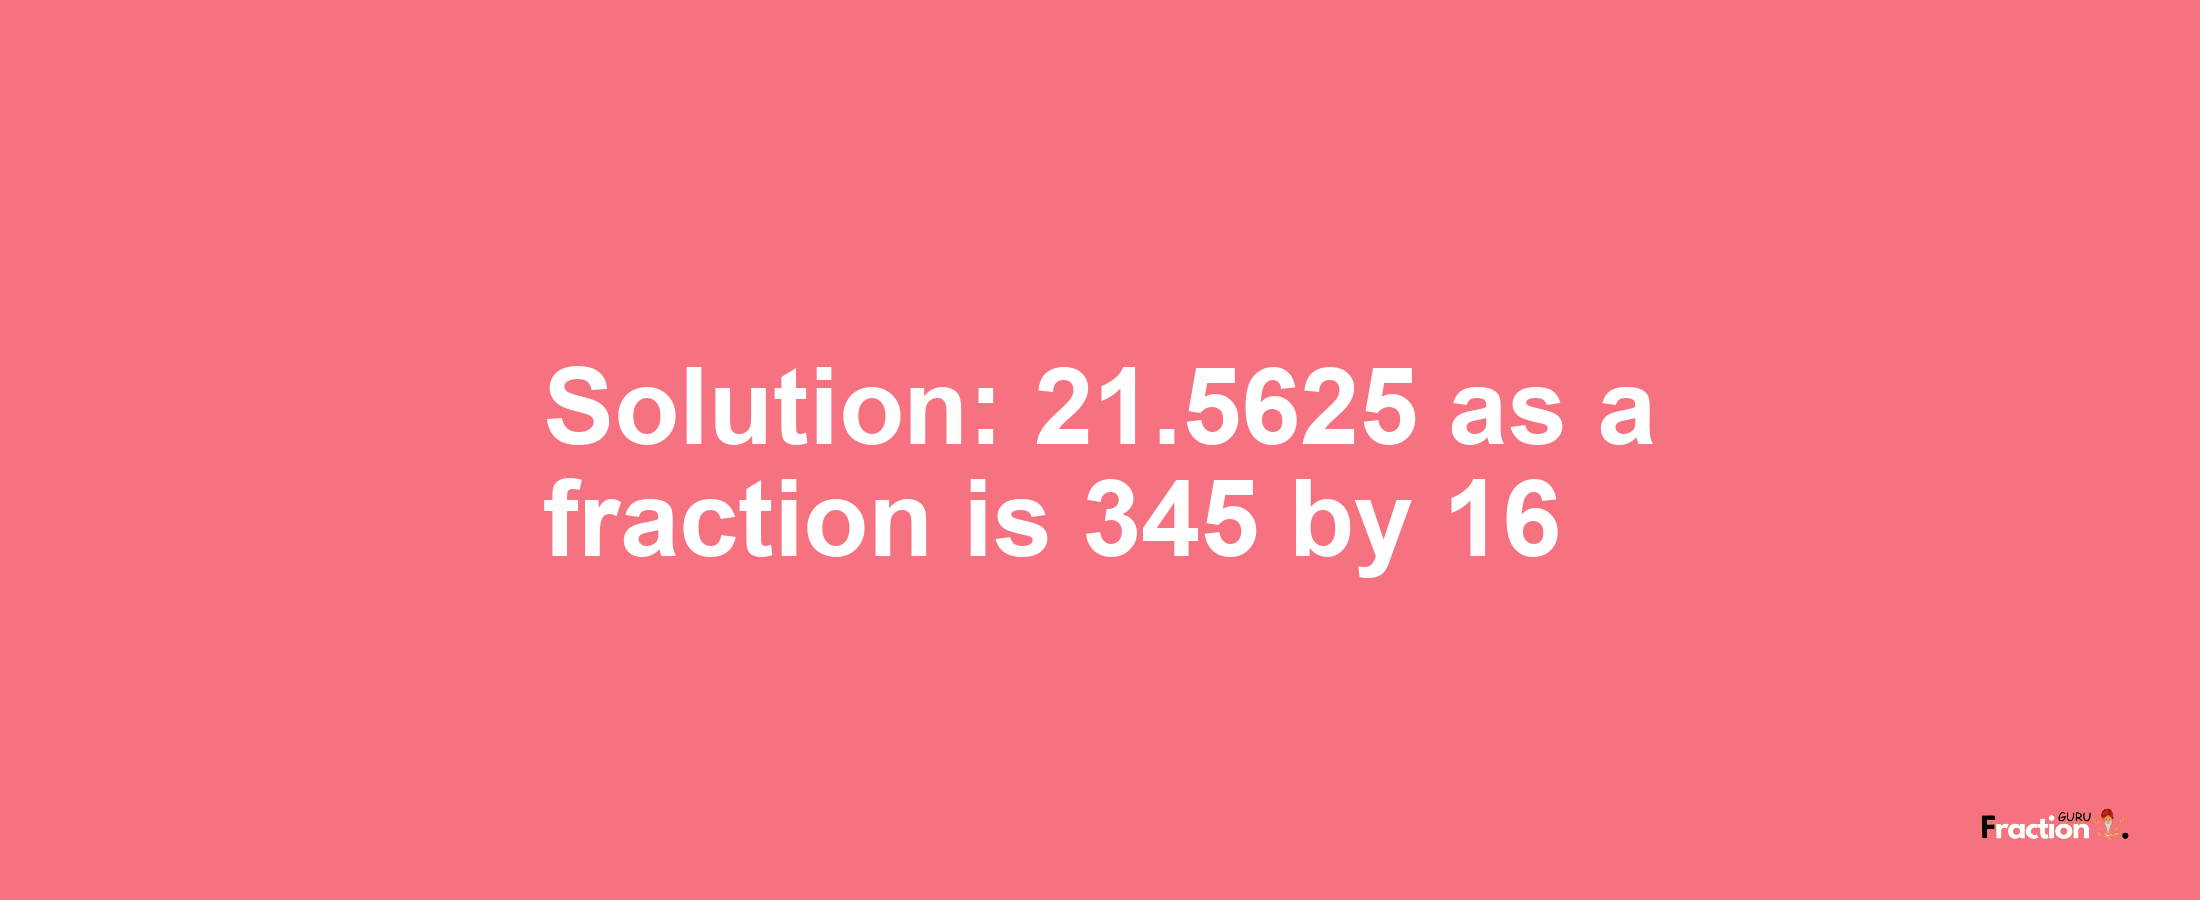 Solution:21.5625 as a fraction is 345/16